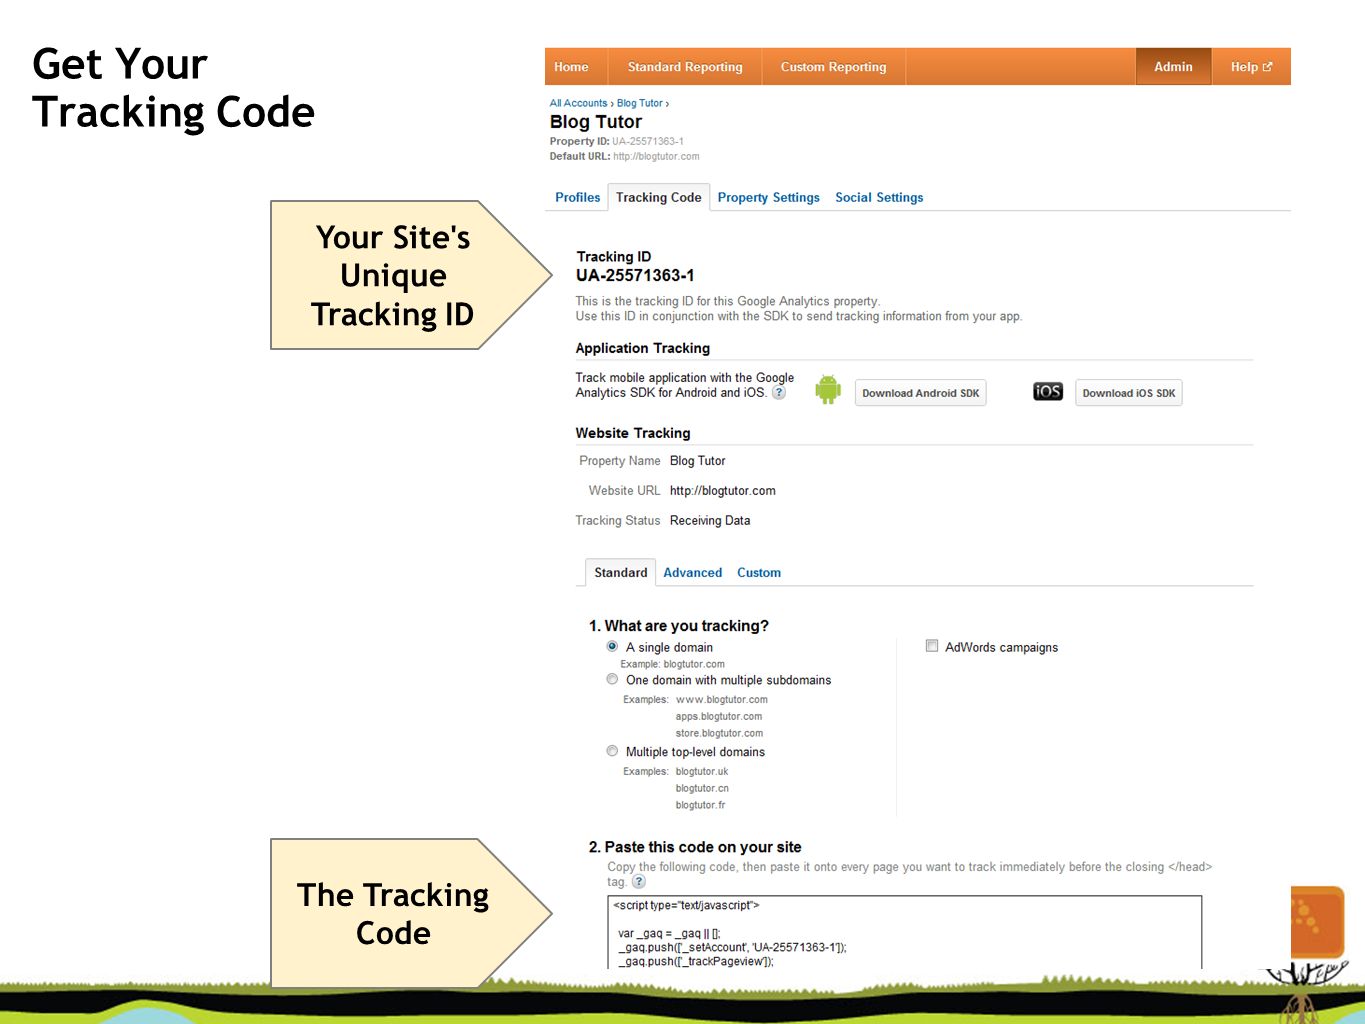 Get Your Tracking Code Your Site s Unique Tracking ID The Tracking Code